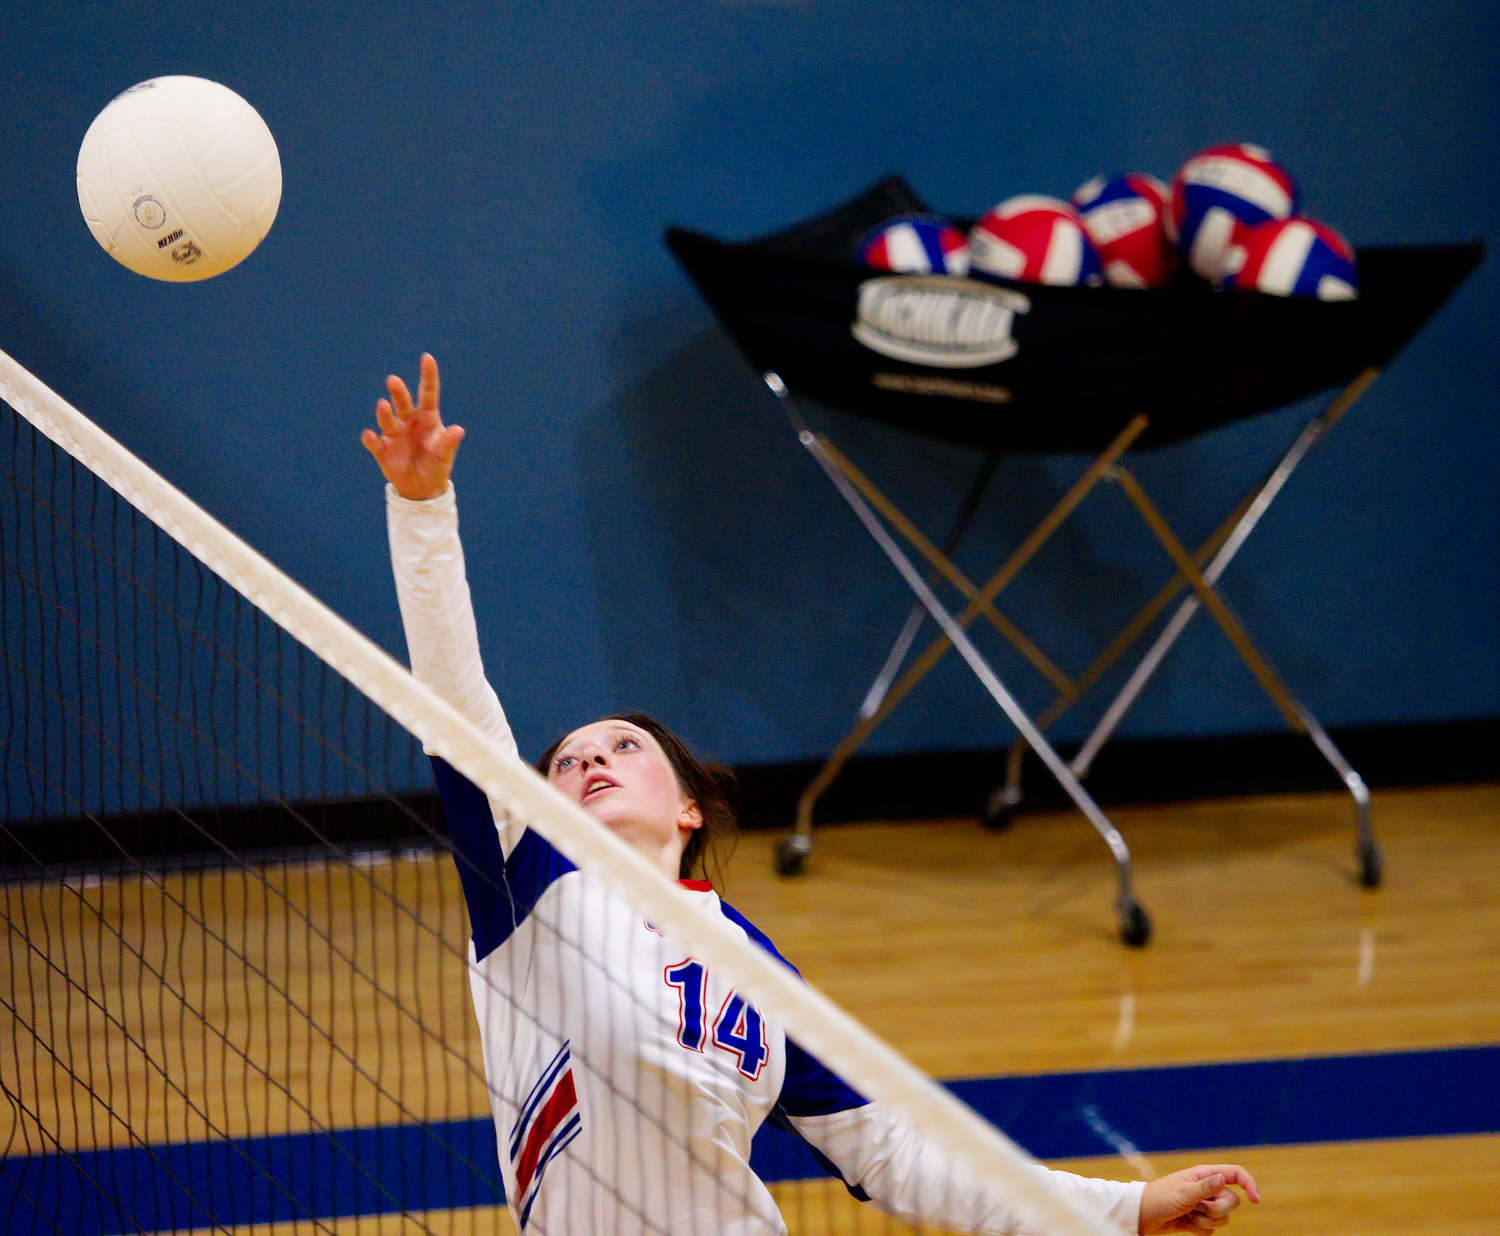 Peyton Kruckner tips the ball back for Quitman. [view more volleyball shots]